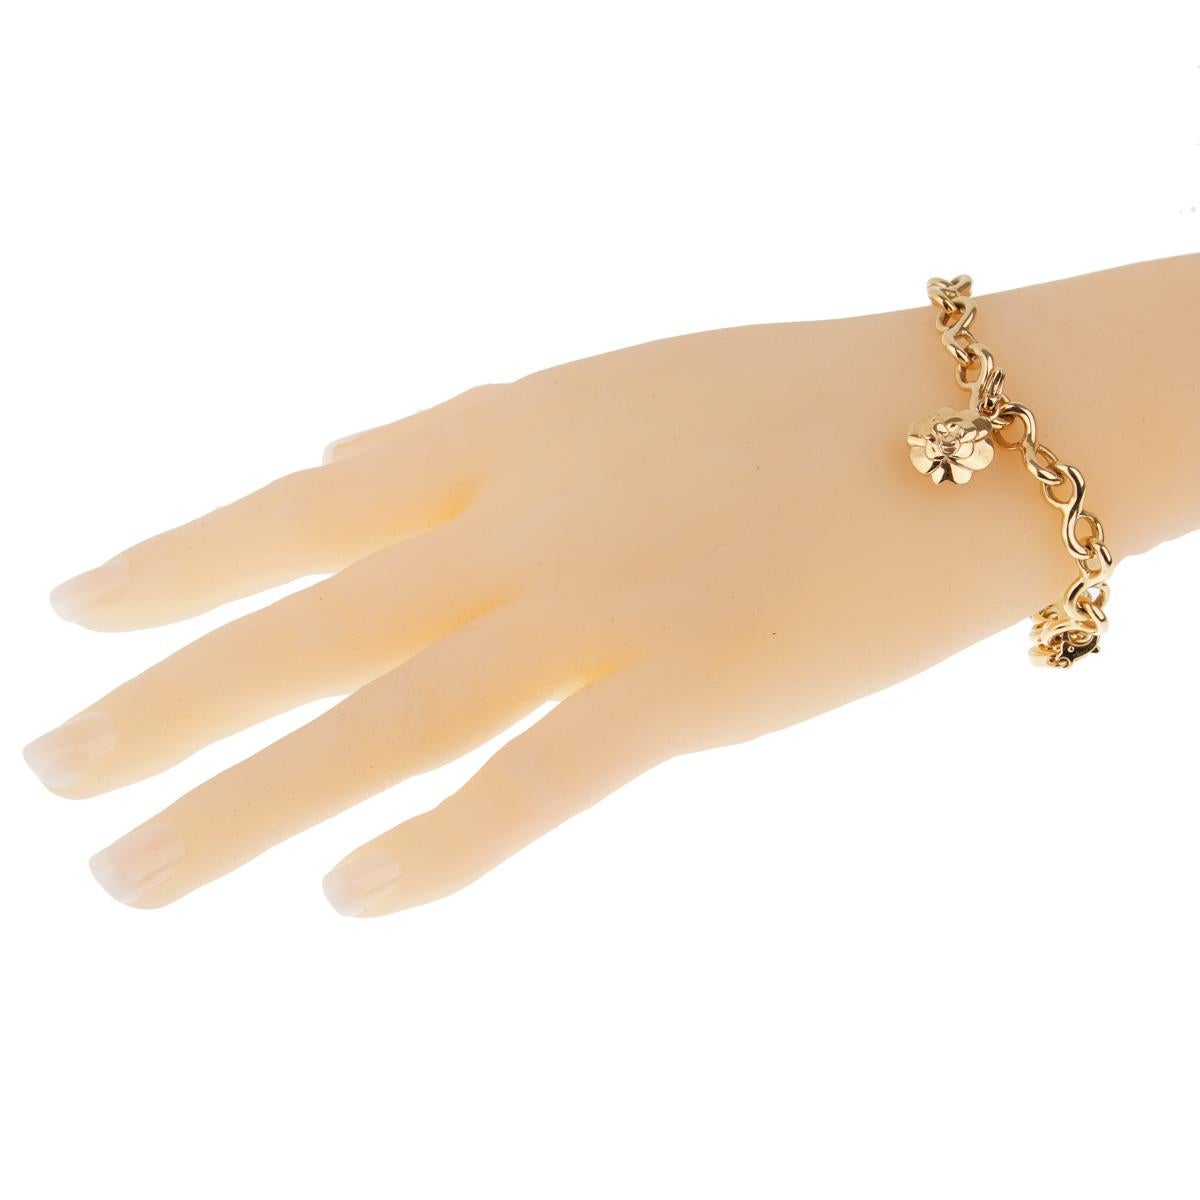 A fabulous authentic Chanel diamond yellow gold charm bracelet, featuring a diamond studded Number 5, a Camellia flower and a sleek “C”, all set upon an 18k solid Chanel yellow gold link bracelet.

Length: 7